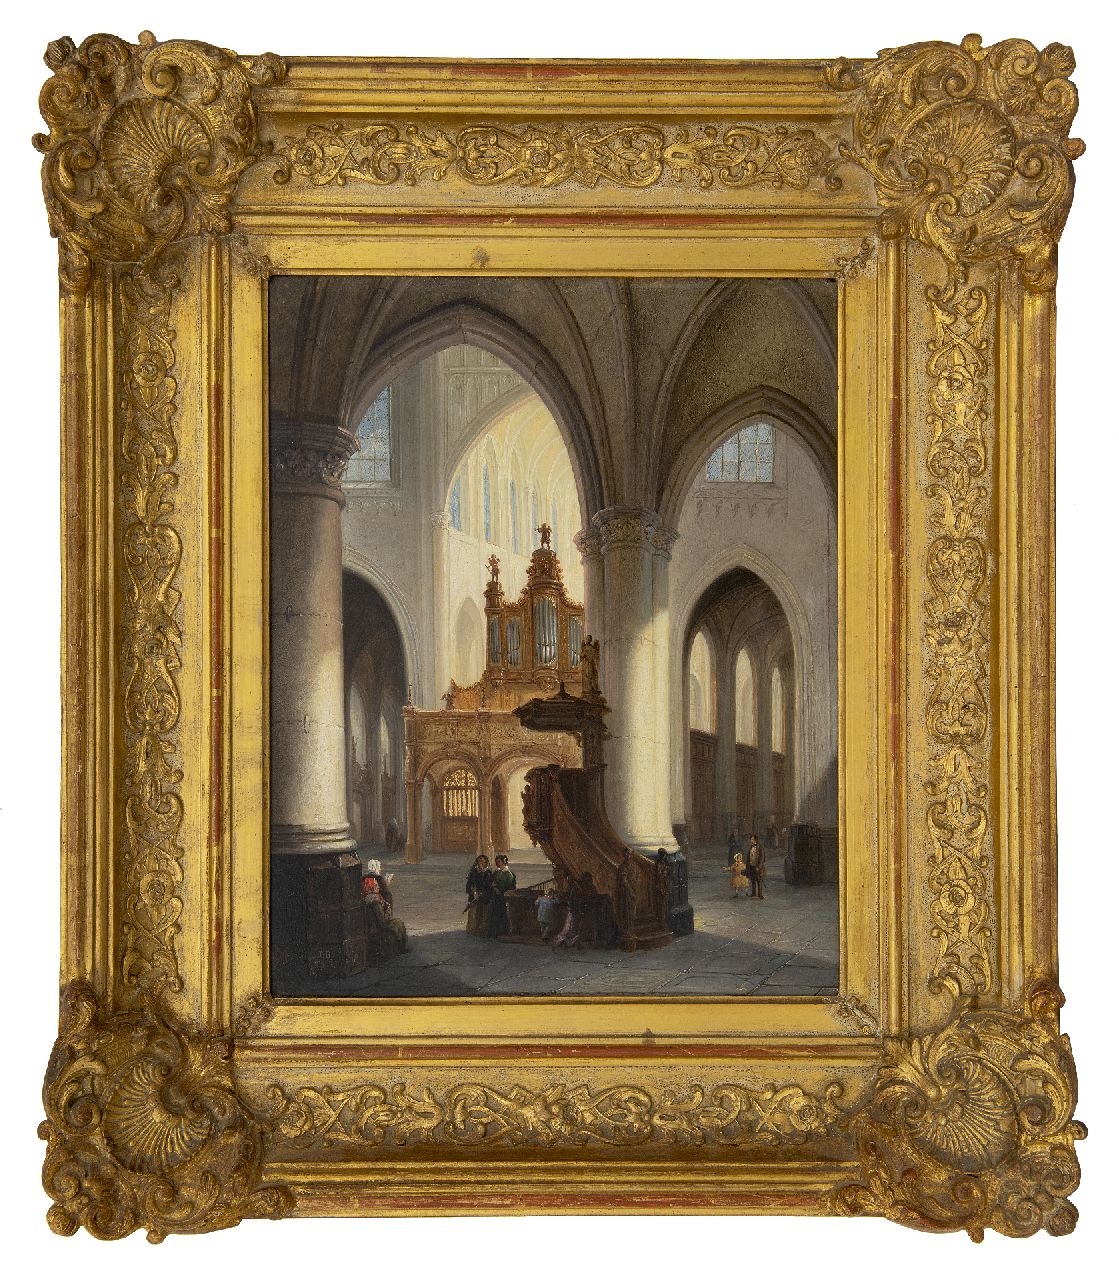 Tetar van Elven J.B.  | Jan 'Johannes' Baptist Tetar van Elven | Paintings offered for sale | A church interior with figures, oil on panel 36.8 x 29.7 cm, signed l.l. with initials and out full on the reverse